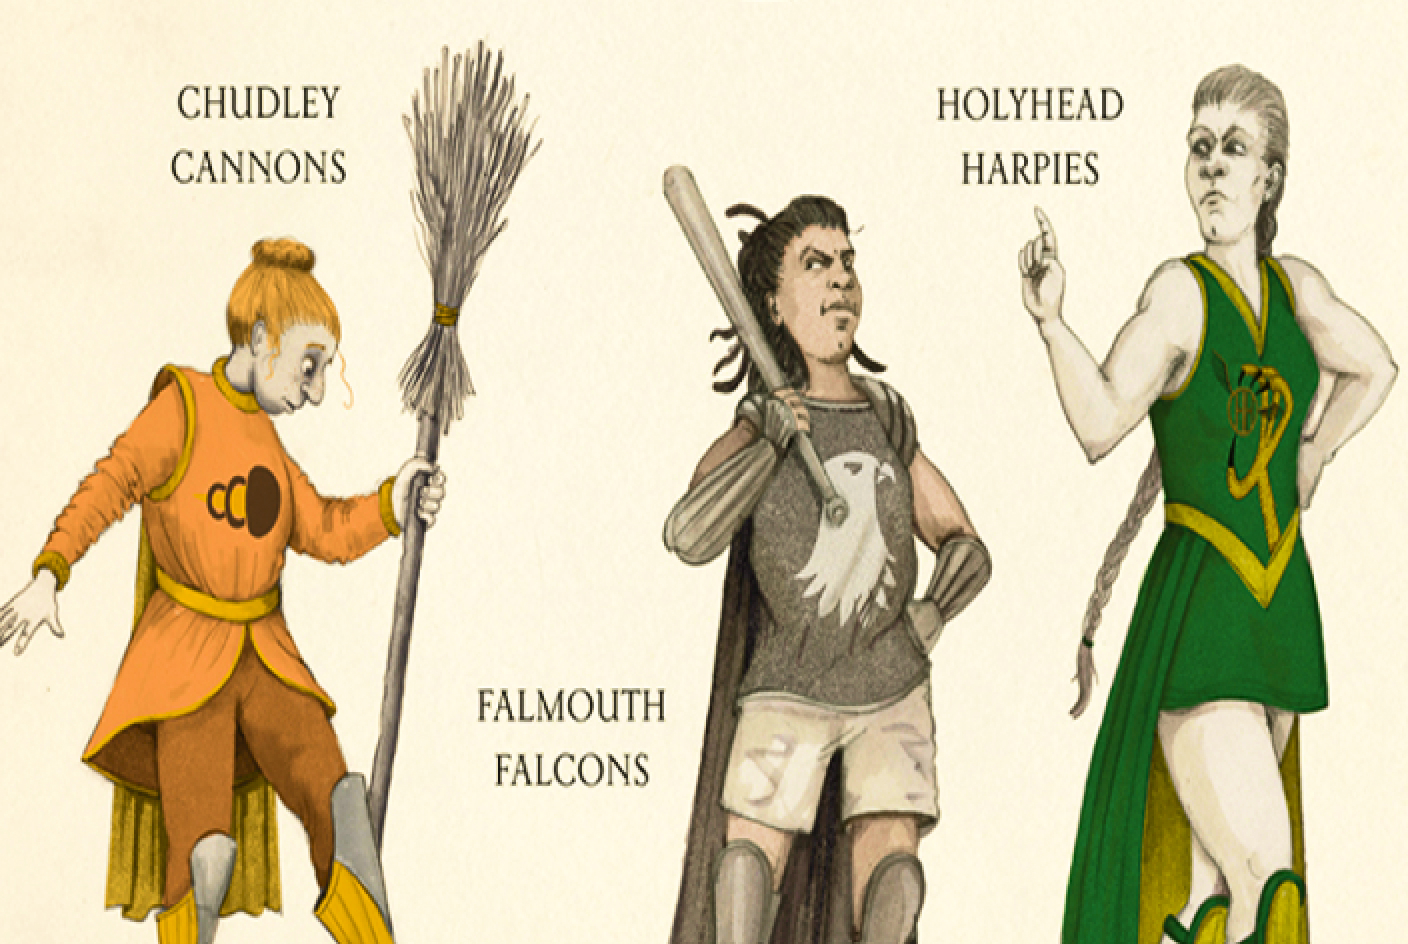 Invent your own sport - inspired by Quidditch